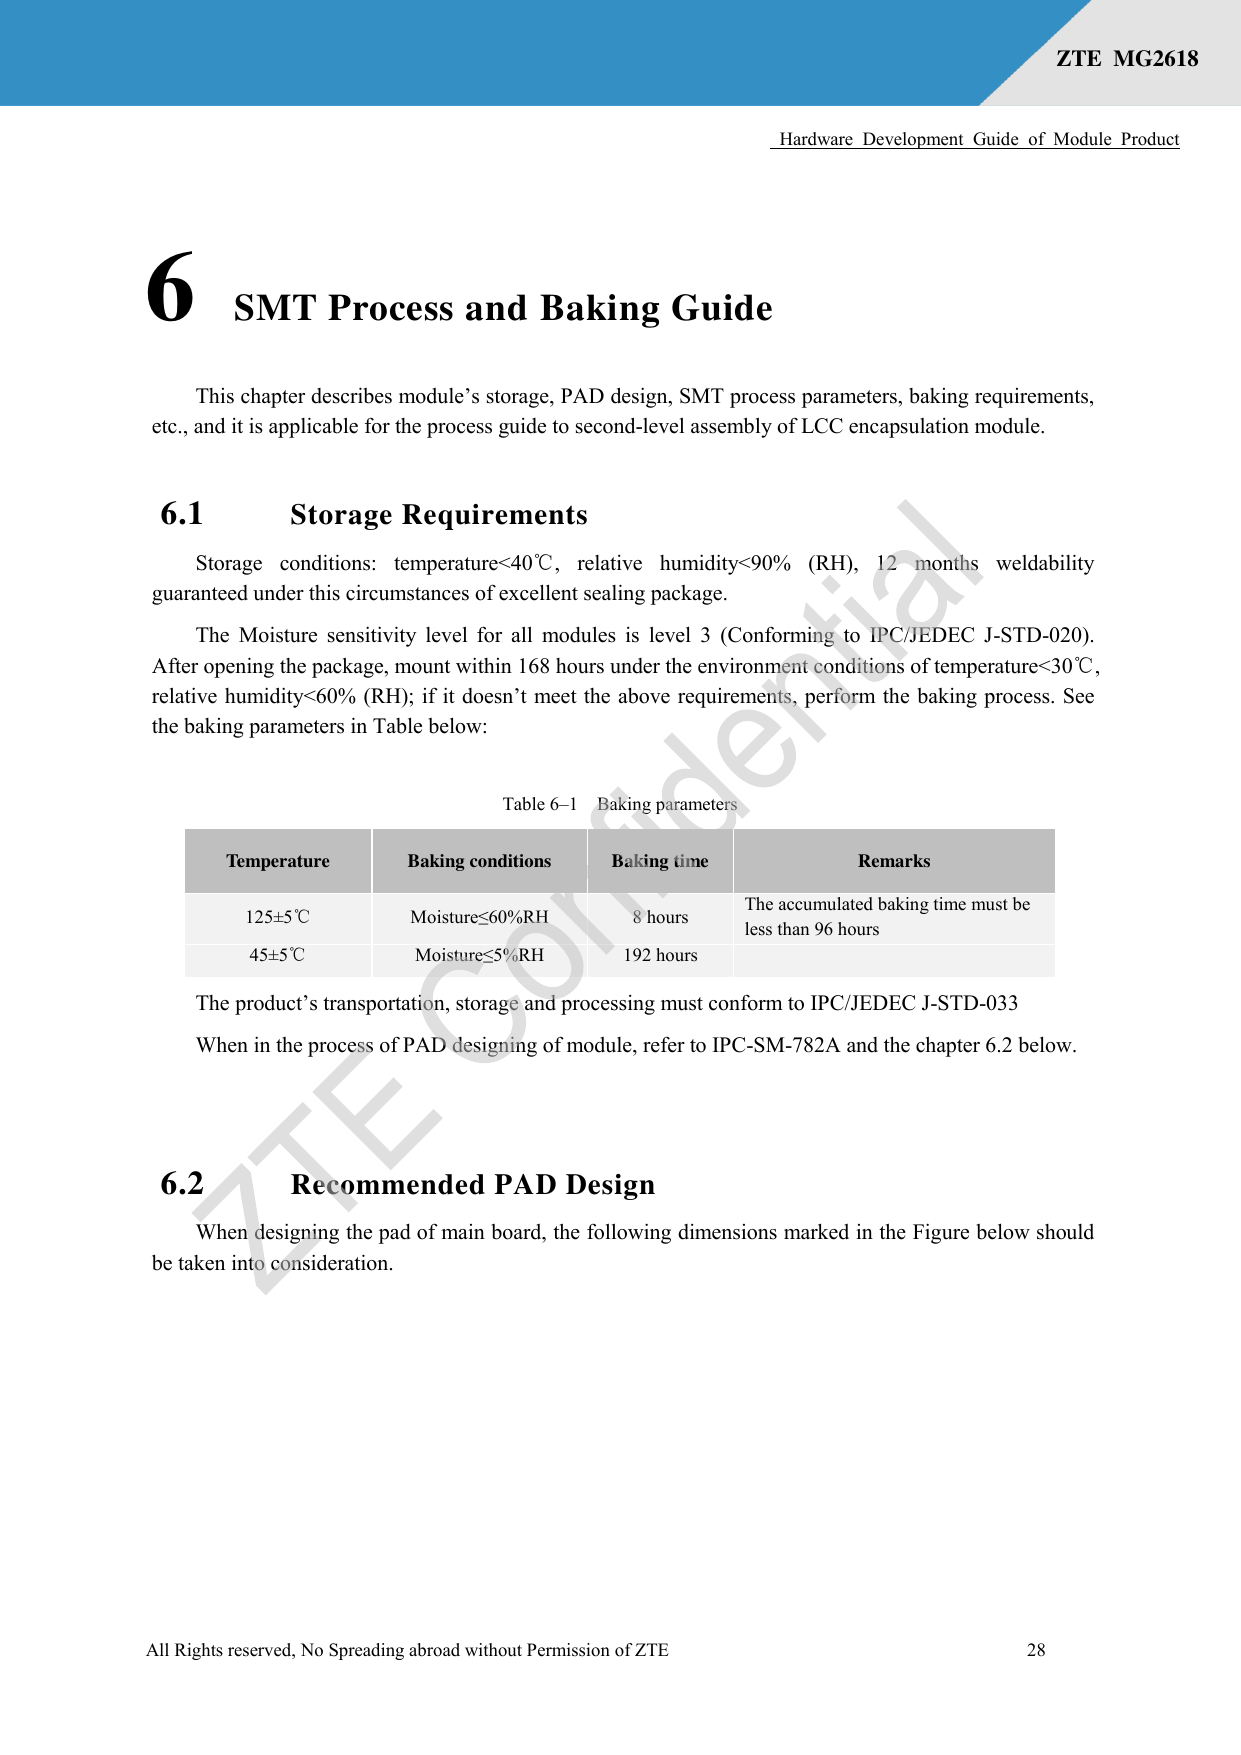      Hardware  Development  Guide  of  Module  Product  All Rights reserved, No Spreading abroad without Permission of ZTE              28 ZTE  MG2618    6 SMT Process and Baking Guide  This chapter describes module’s storage, PAD design, SMT process parameters, baking requirements, etc., and it is applicable for the process guide to second-level assembly of LCC encapsulation module. 6.1 Storage Requirements Storage  conditions:  temperature&lt;40℃,  relative  humidity&lt;90%  (RH),  12  months  weldability guaranteed under this circumstances of excellent sealing package. The Moisture sensitivity level for  all modules is  level 3  (Conforming to IPC/JEDEC J-STD-020). After opening the package, mount within 168 hours under the environment conditions of temperature&lt;30℃, relative humidity&lt;60% (RH); if it doesn’t meet the above requirements, perform the baking process. See the baking parameters in Table below: Table 6–1  Baking parameters Temperature Baking conditions Baking time Remarks 125±5℃ Moisture≤60%RH 8 hours The accumulated baking time must be less than 96 hours   45±5℃ Moisture≤5%RH 192 hours  The product’s transportation, storage and processing must conform to IPC/JEDEC J-STD-033 When in the process of PAD designing of module, refer to IPC-SM-782A and the chapter 6.2 below.  6.2 Recommended PAD Design   When designing the pad of main board, the following dimensions marked in the Figure below should be taken into consideration. 